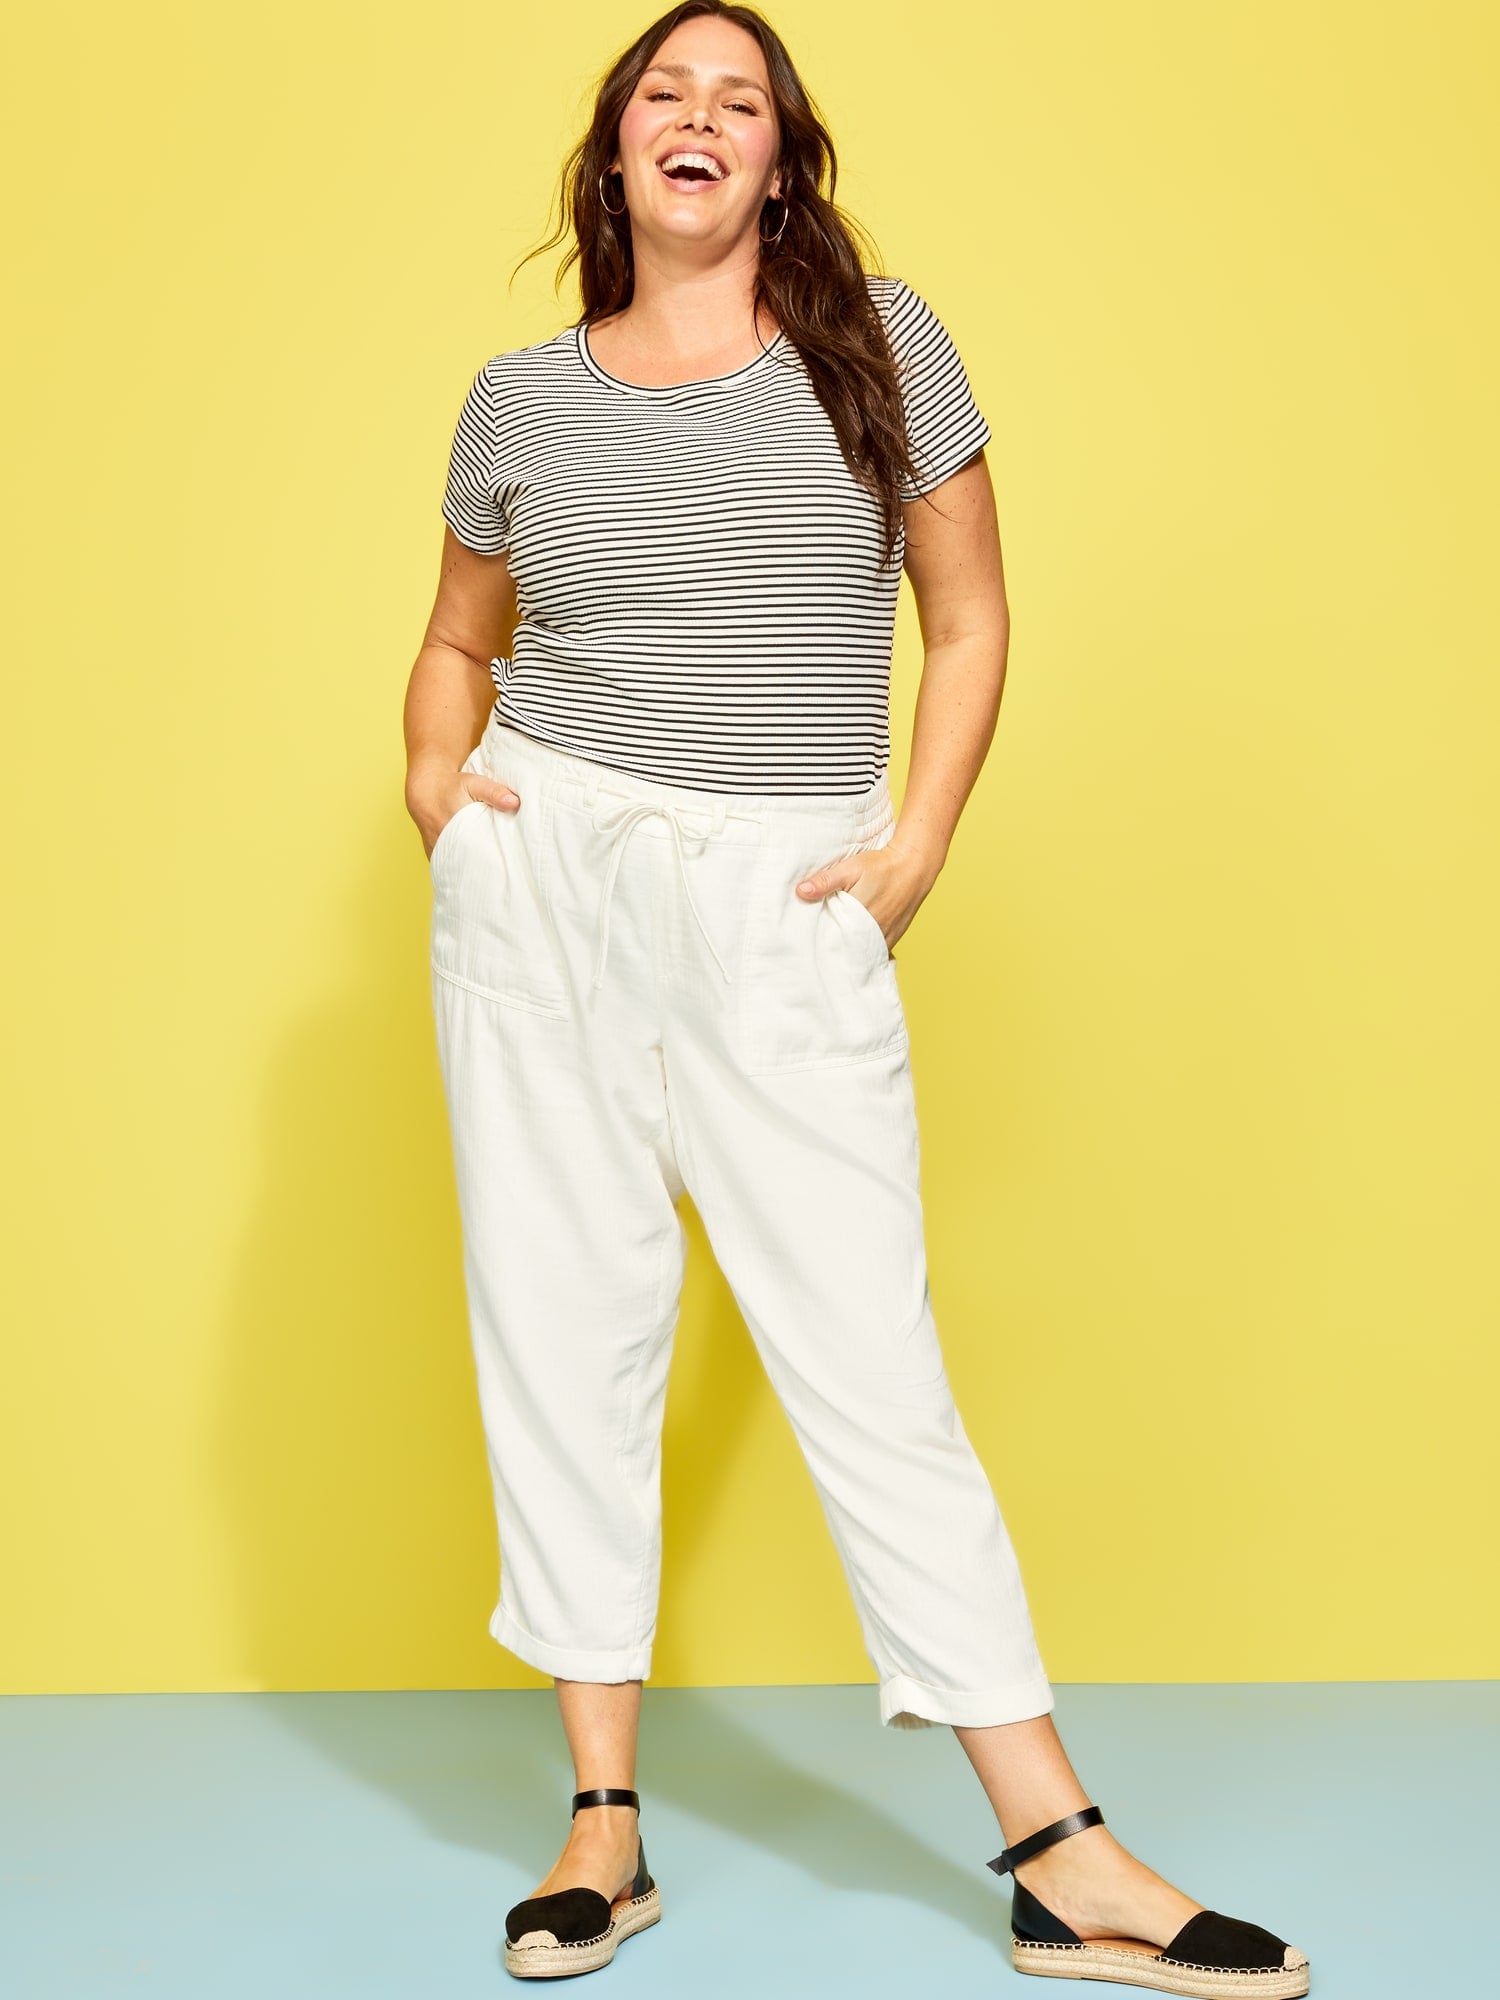  Women's Clothing For Summer Plus Size